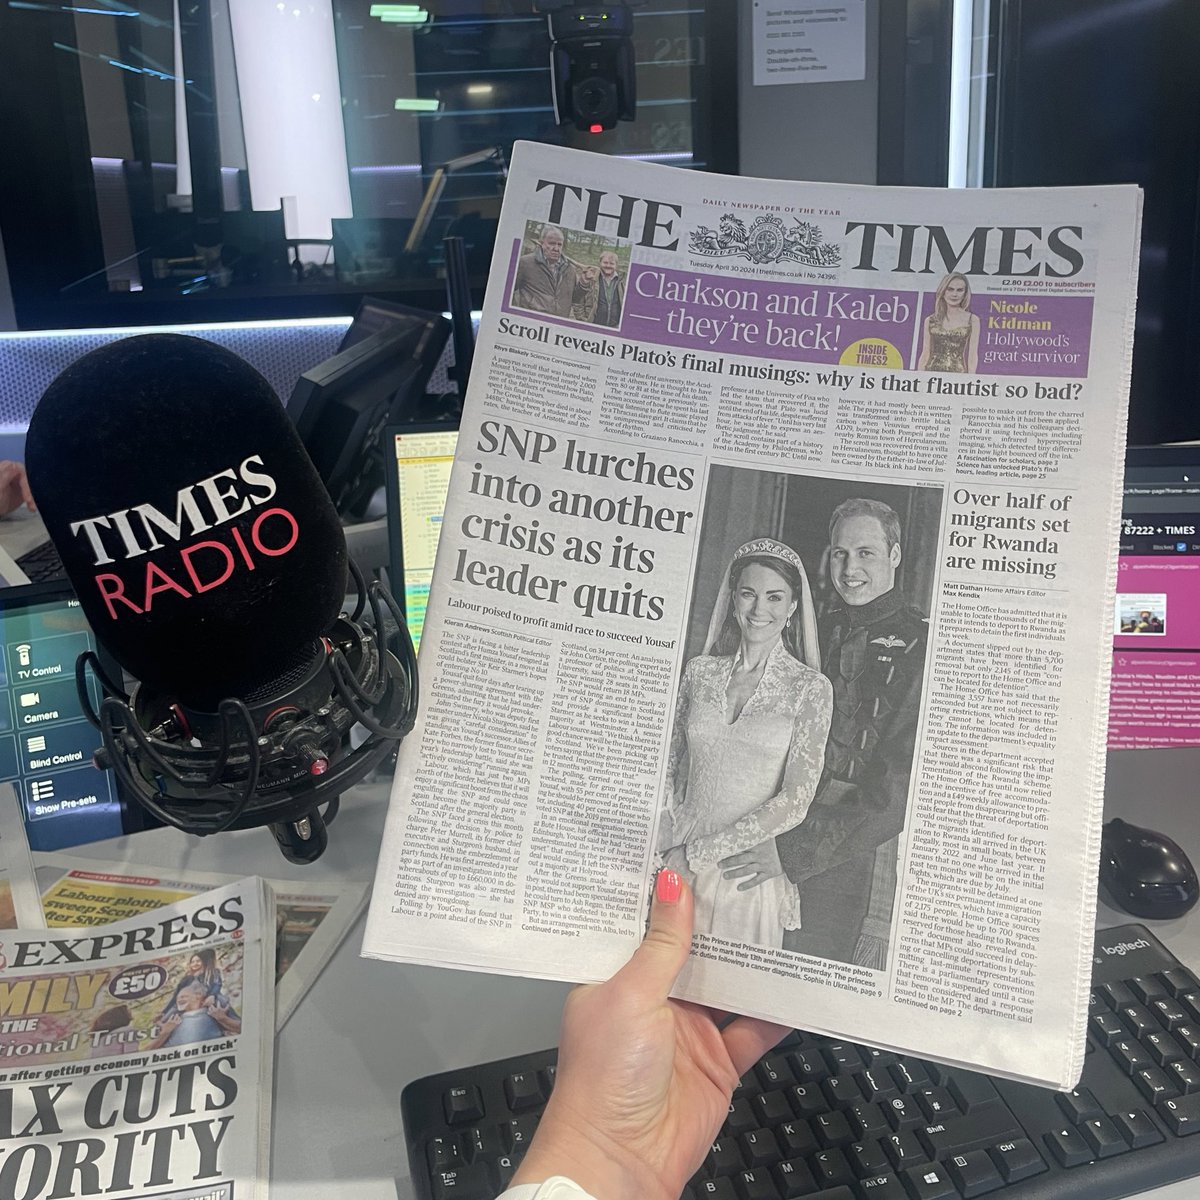 Today from 5am @timesradio: 🏴󠁧󠁢󠁳󠁣󠁴󠁿 SNP search for its next leader @JohnBoothman1 ✈️ Home Office can’t locate migrants intended for Rwanda @martinabettt 🇬🇧 New Brexit border checks @realVickyPryce 📱 Schools banning phones boost grades @IGMansfield 📰 @AndrewEborn reviews